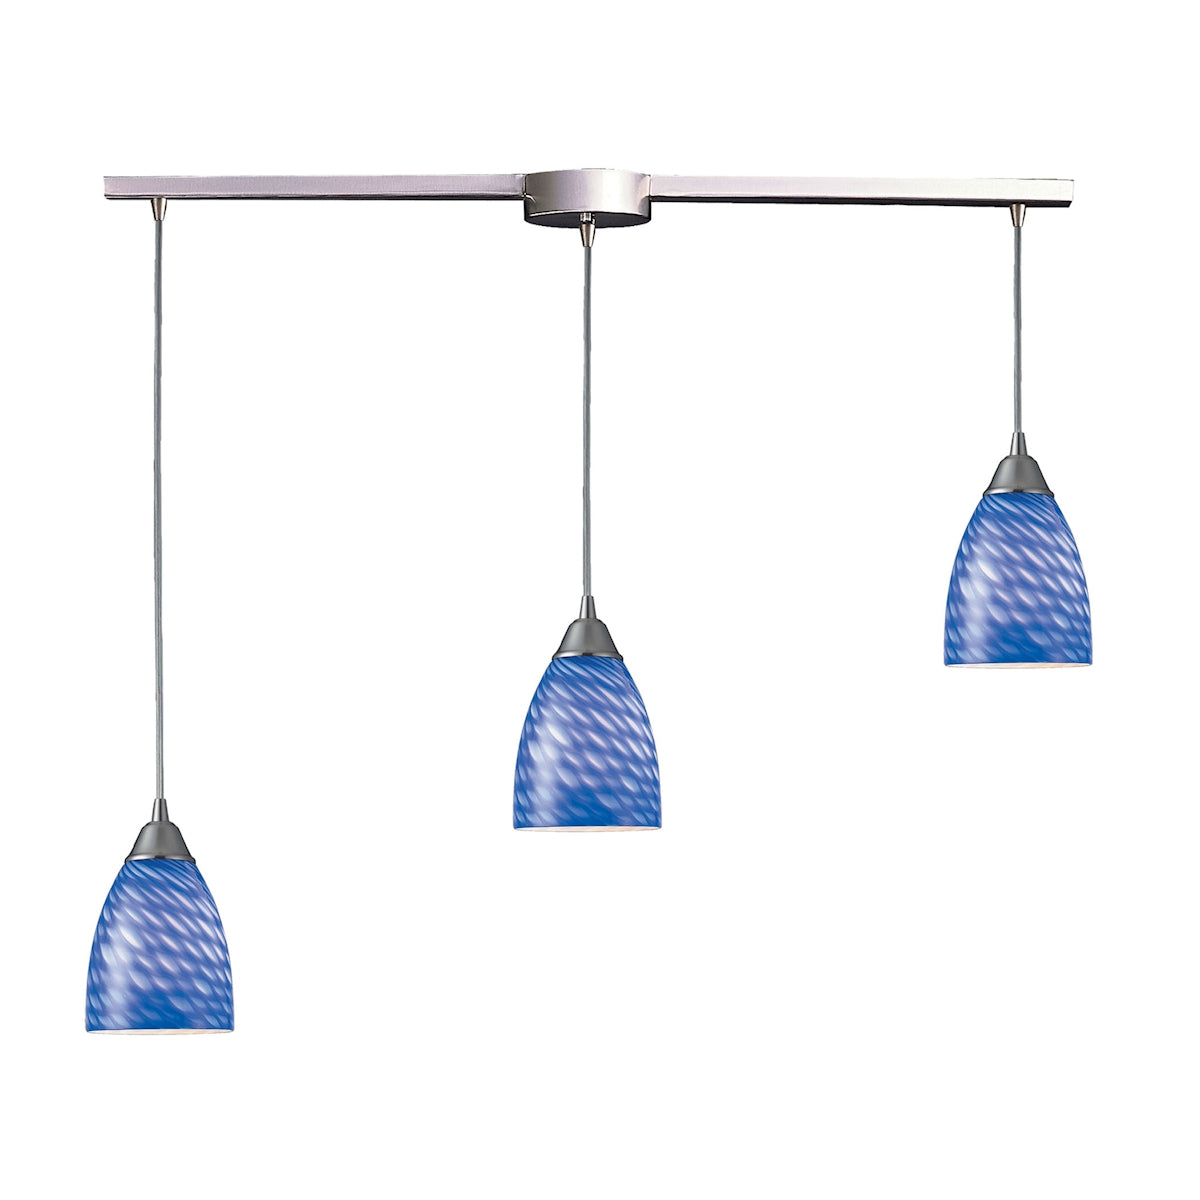 ELK Lighting 416-3L-S Arco Baleno 3-Light Linear Pendant Fixture in Satin Nickel with Sapphire Glass